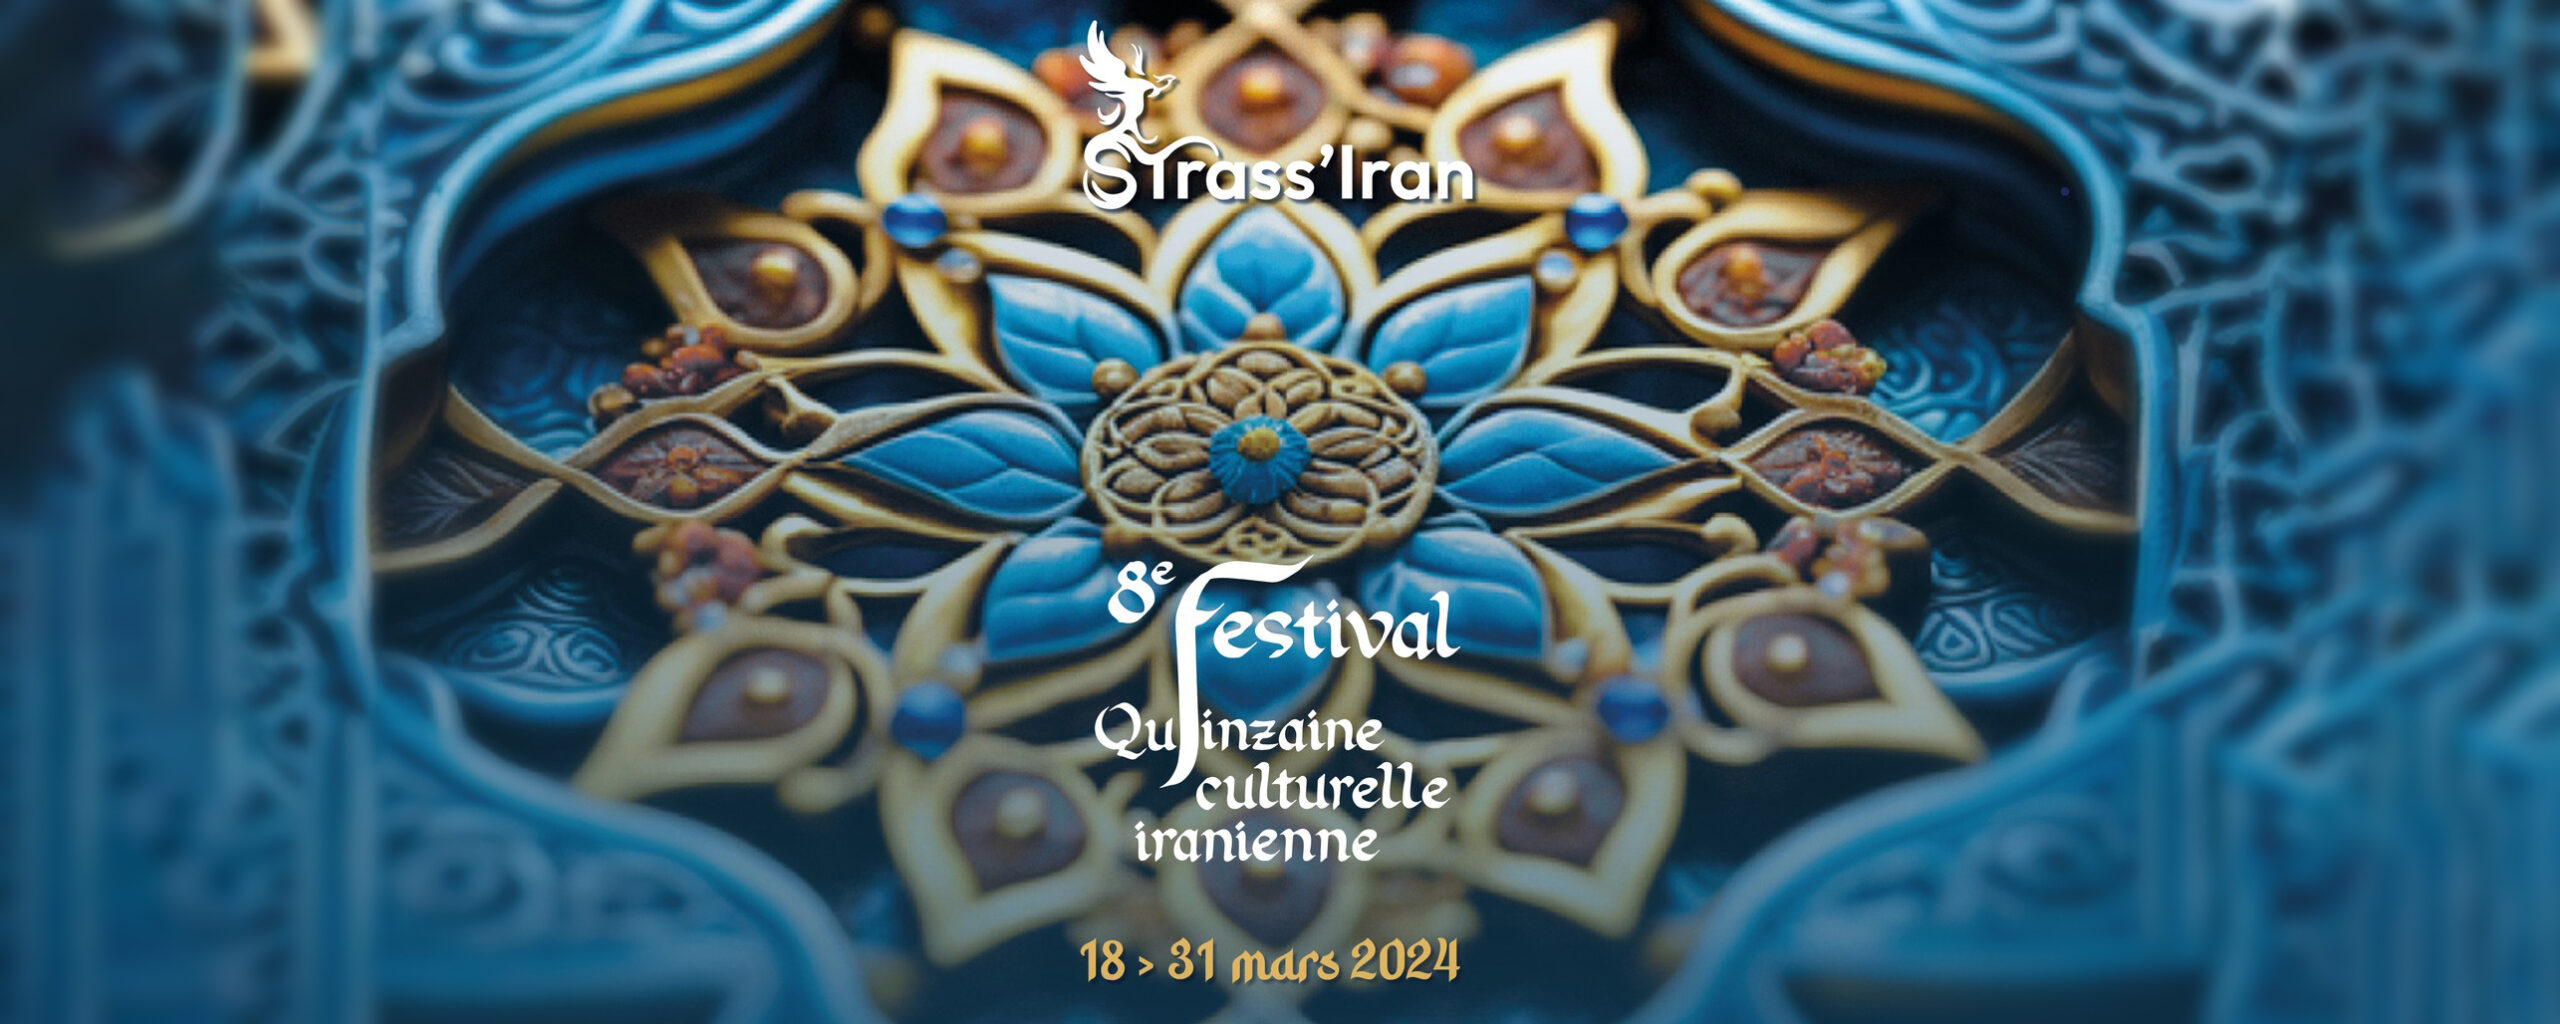 You are currently viewing Strass’Iran : La Quinzaine Culturelle Iranienne